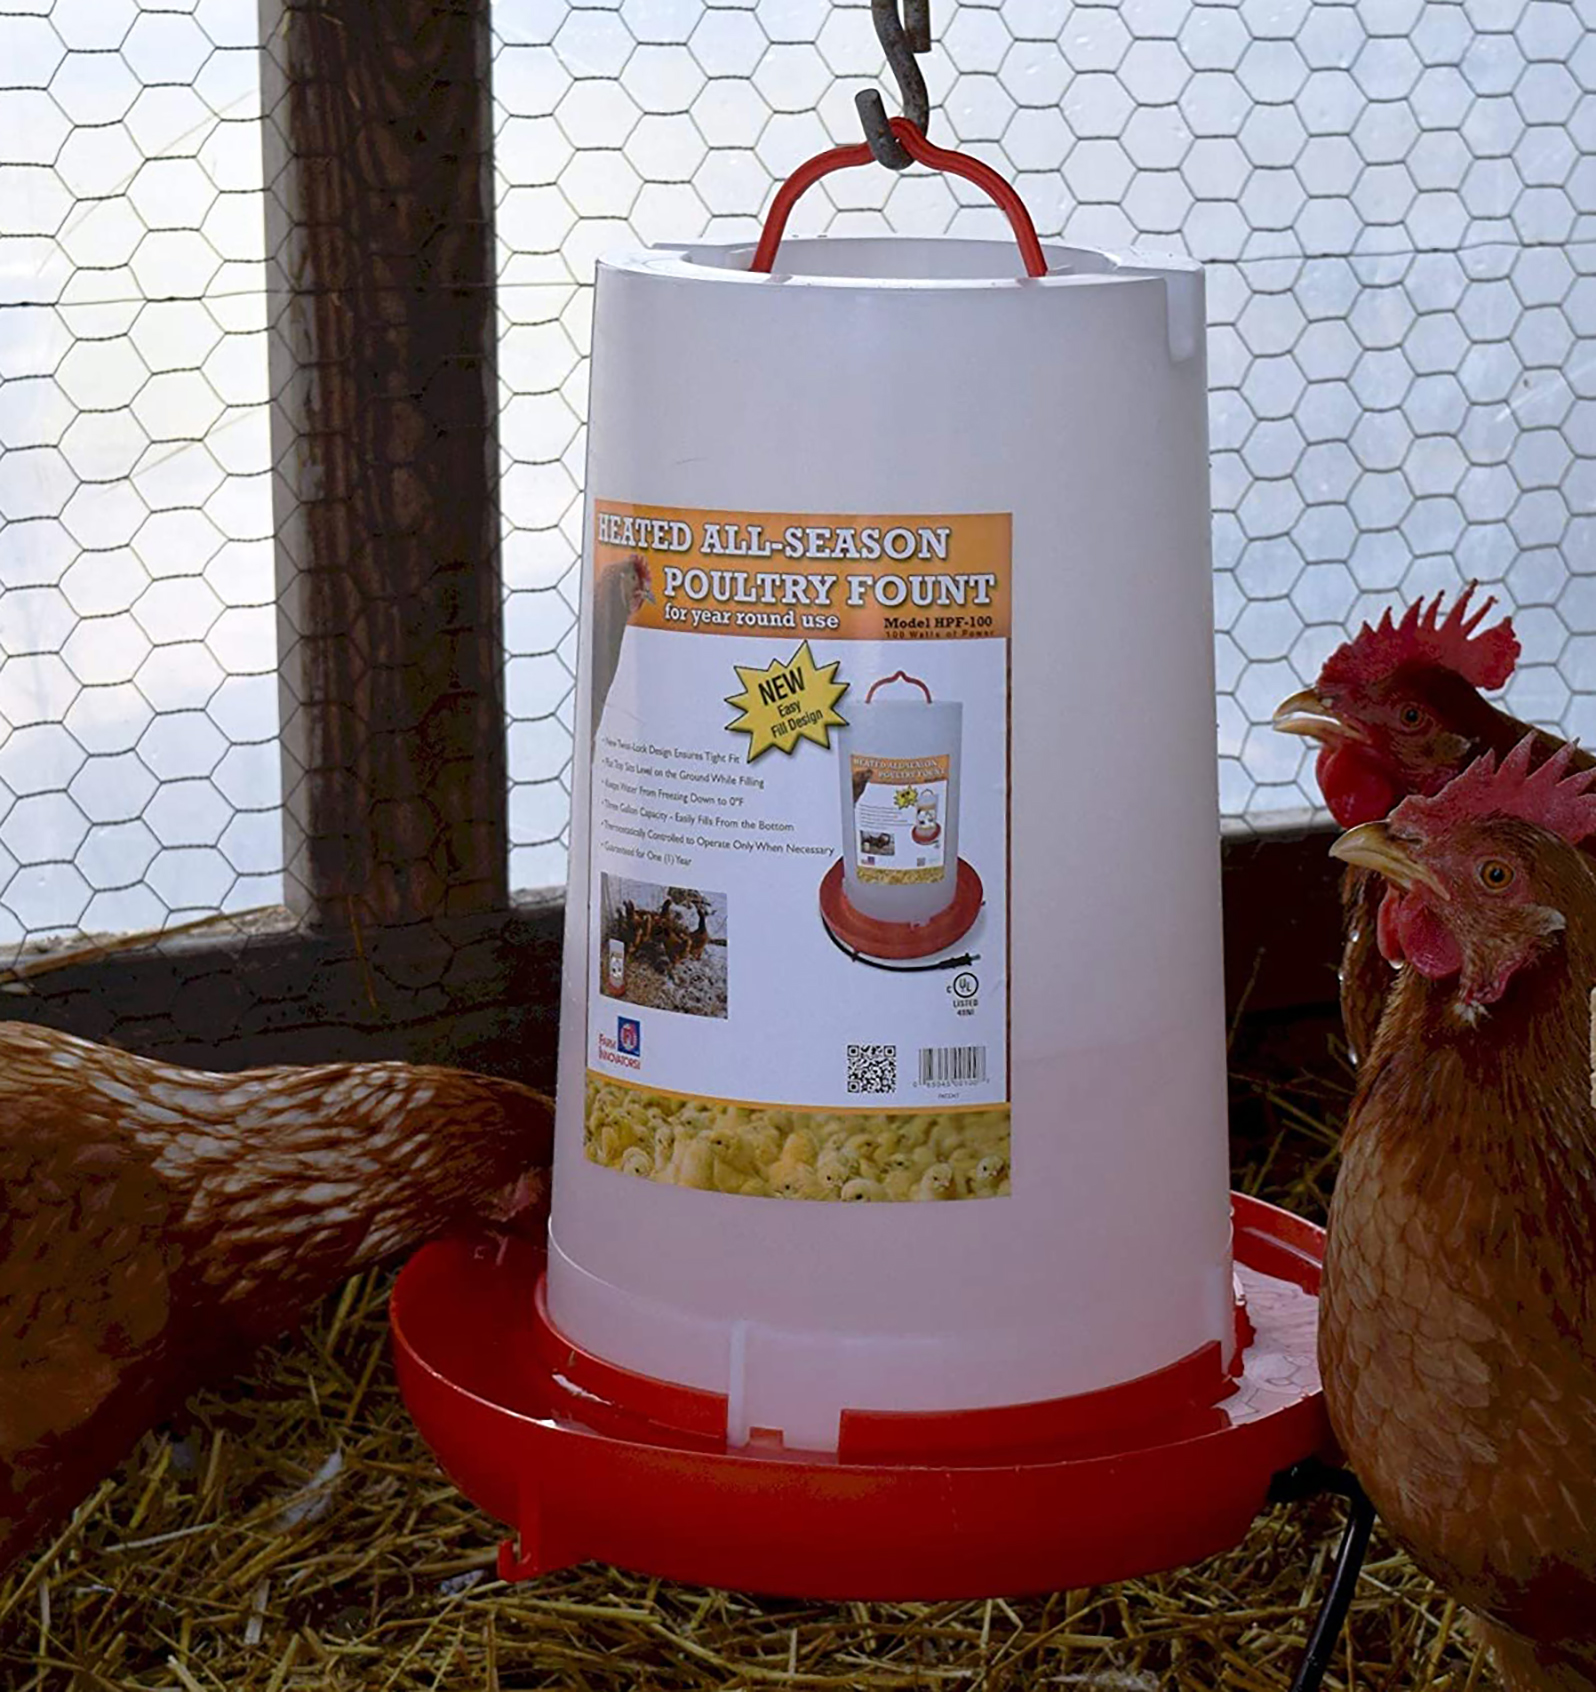 2 Gal Farm Innovators HB-60P Heated Poultry Drinker with Drip-Free Side Mount Nipples Clear